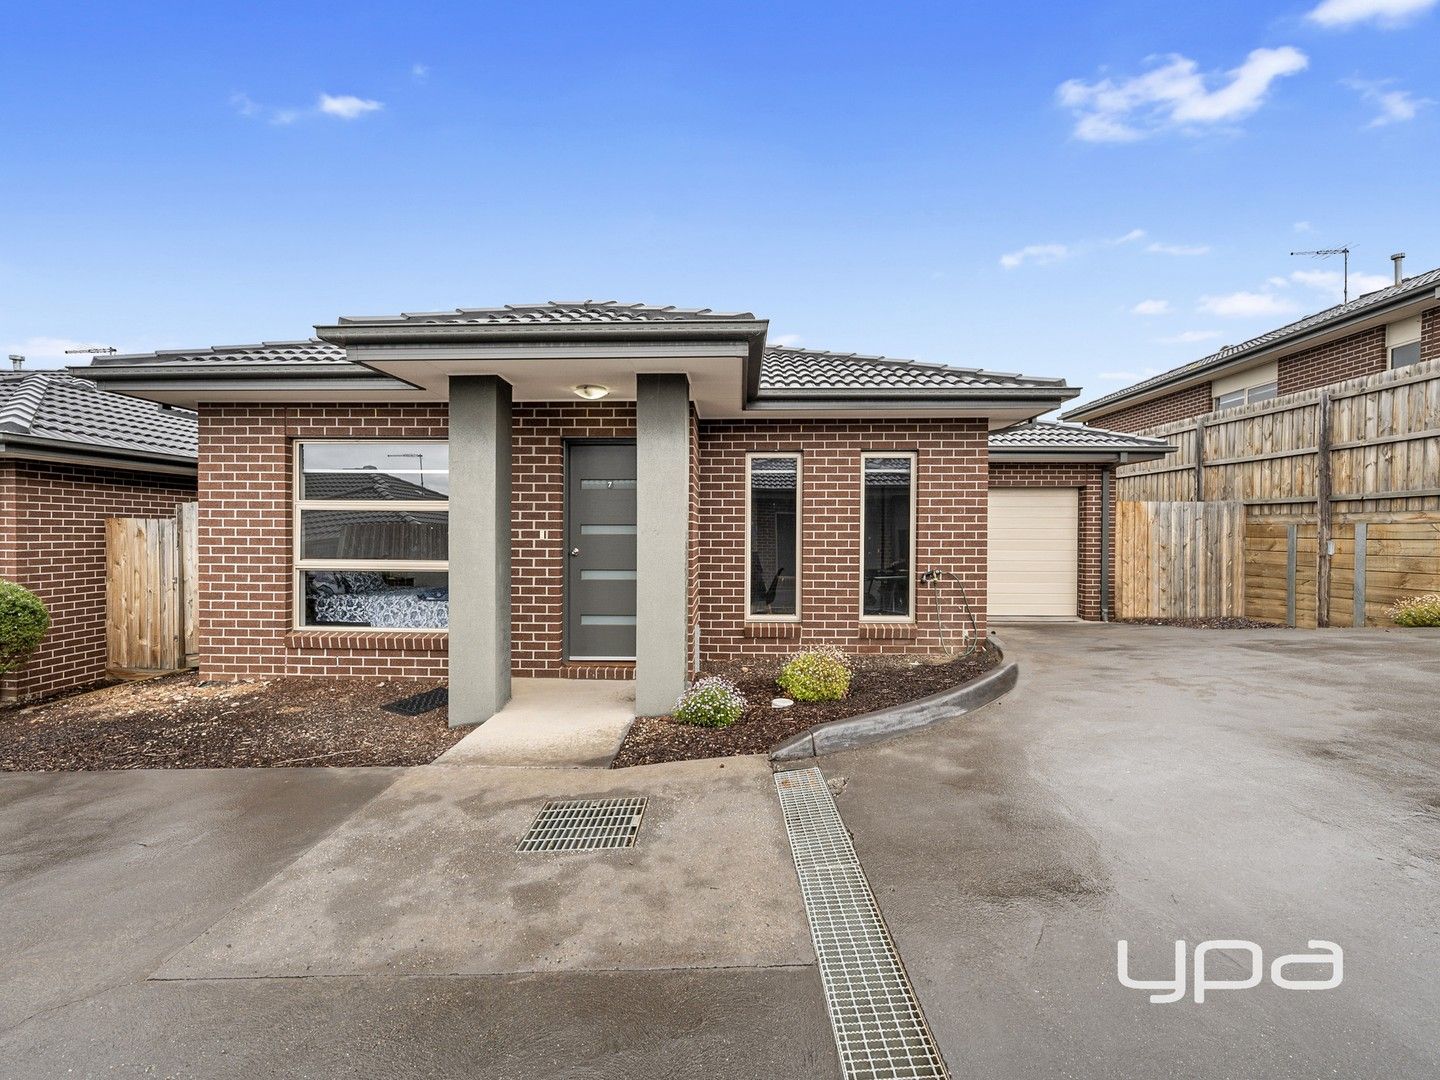 3 bedrooms House in 7/27 Cromarty Circuit DARLEY VIC, 3340